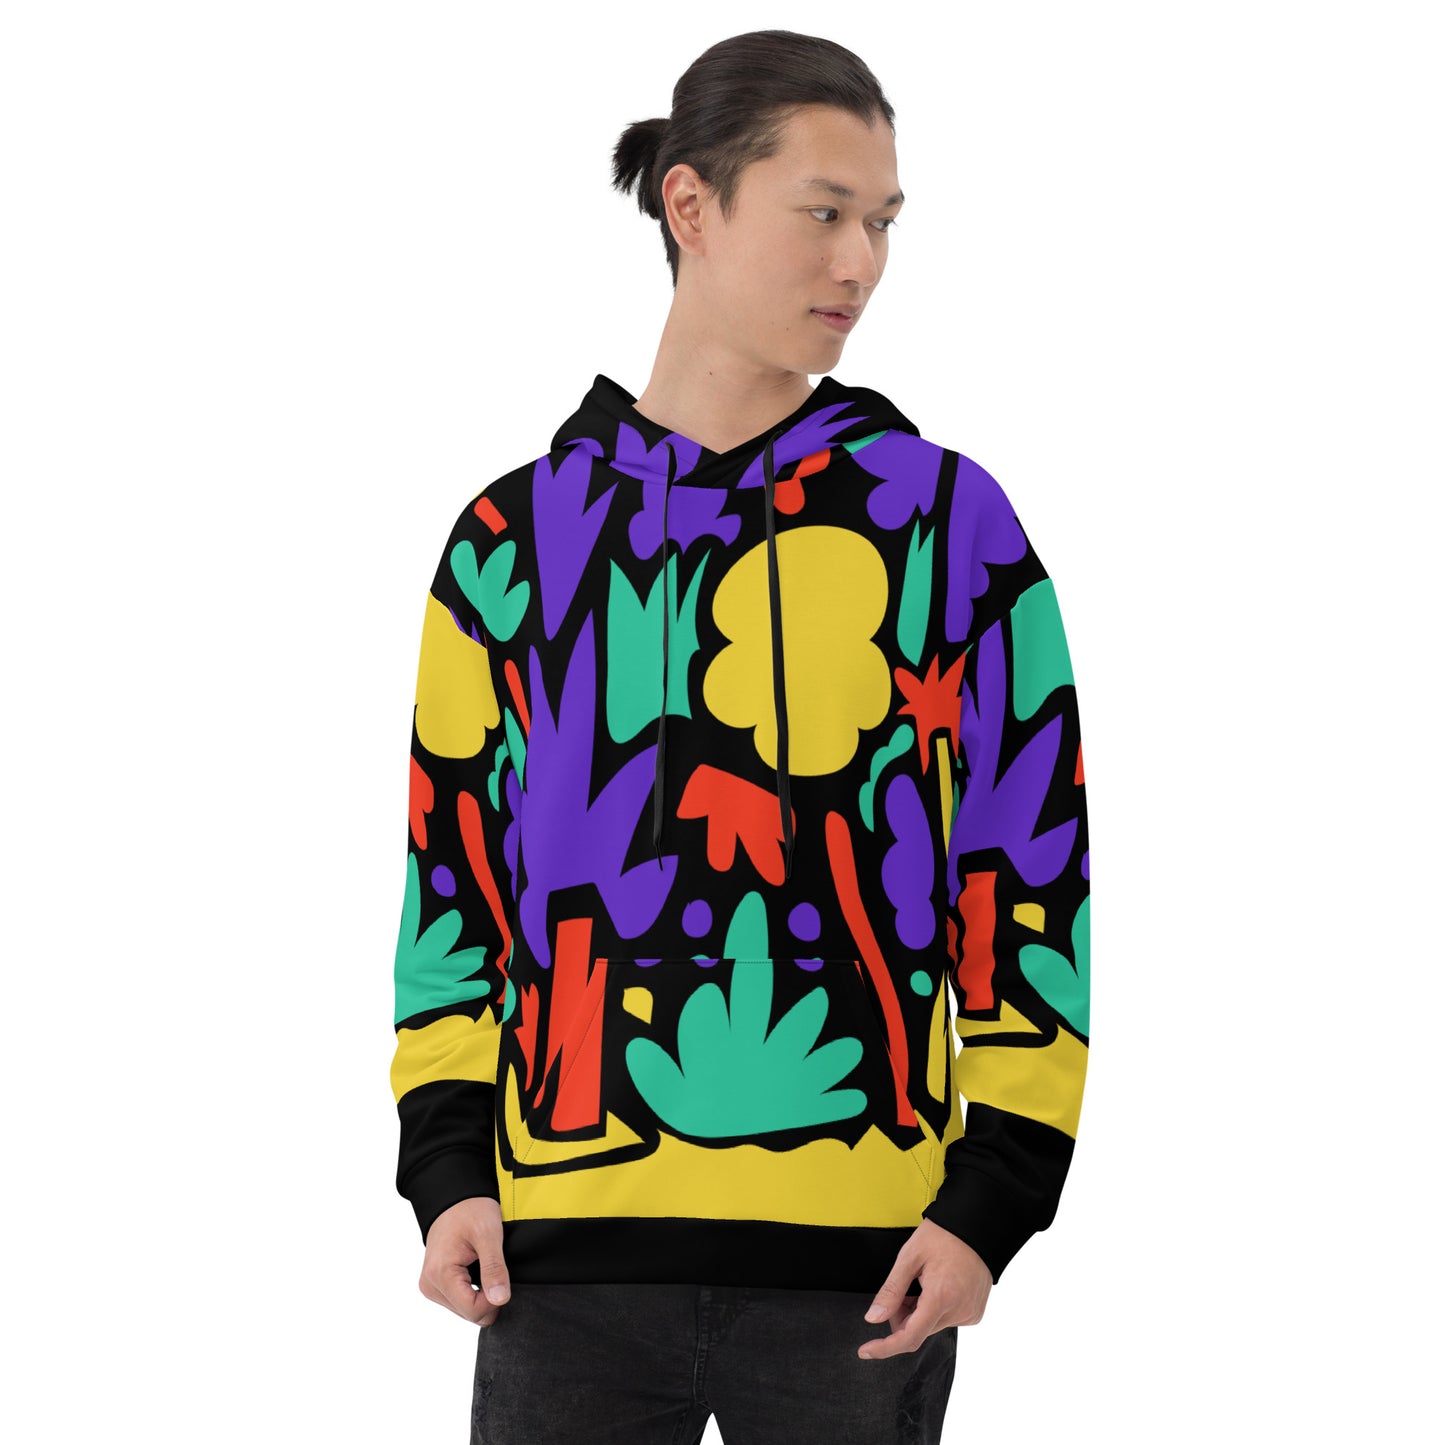 Floral Forest Recycled Hoodie